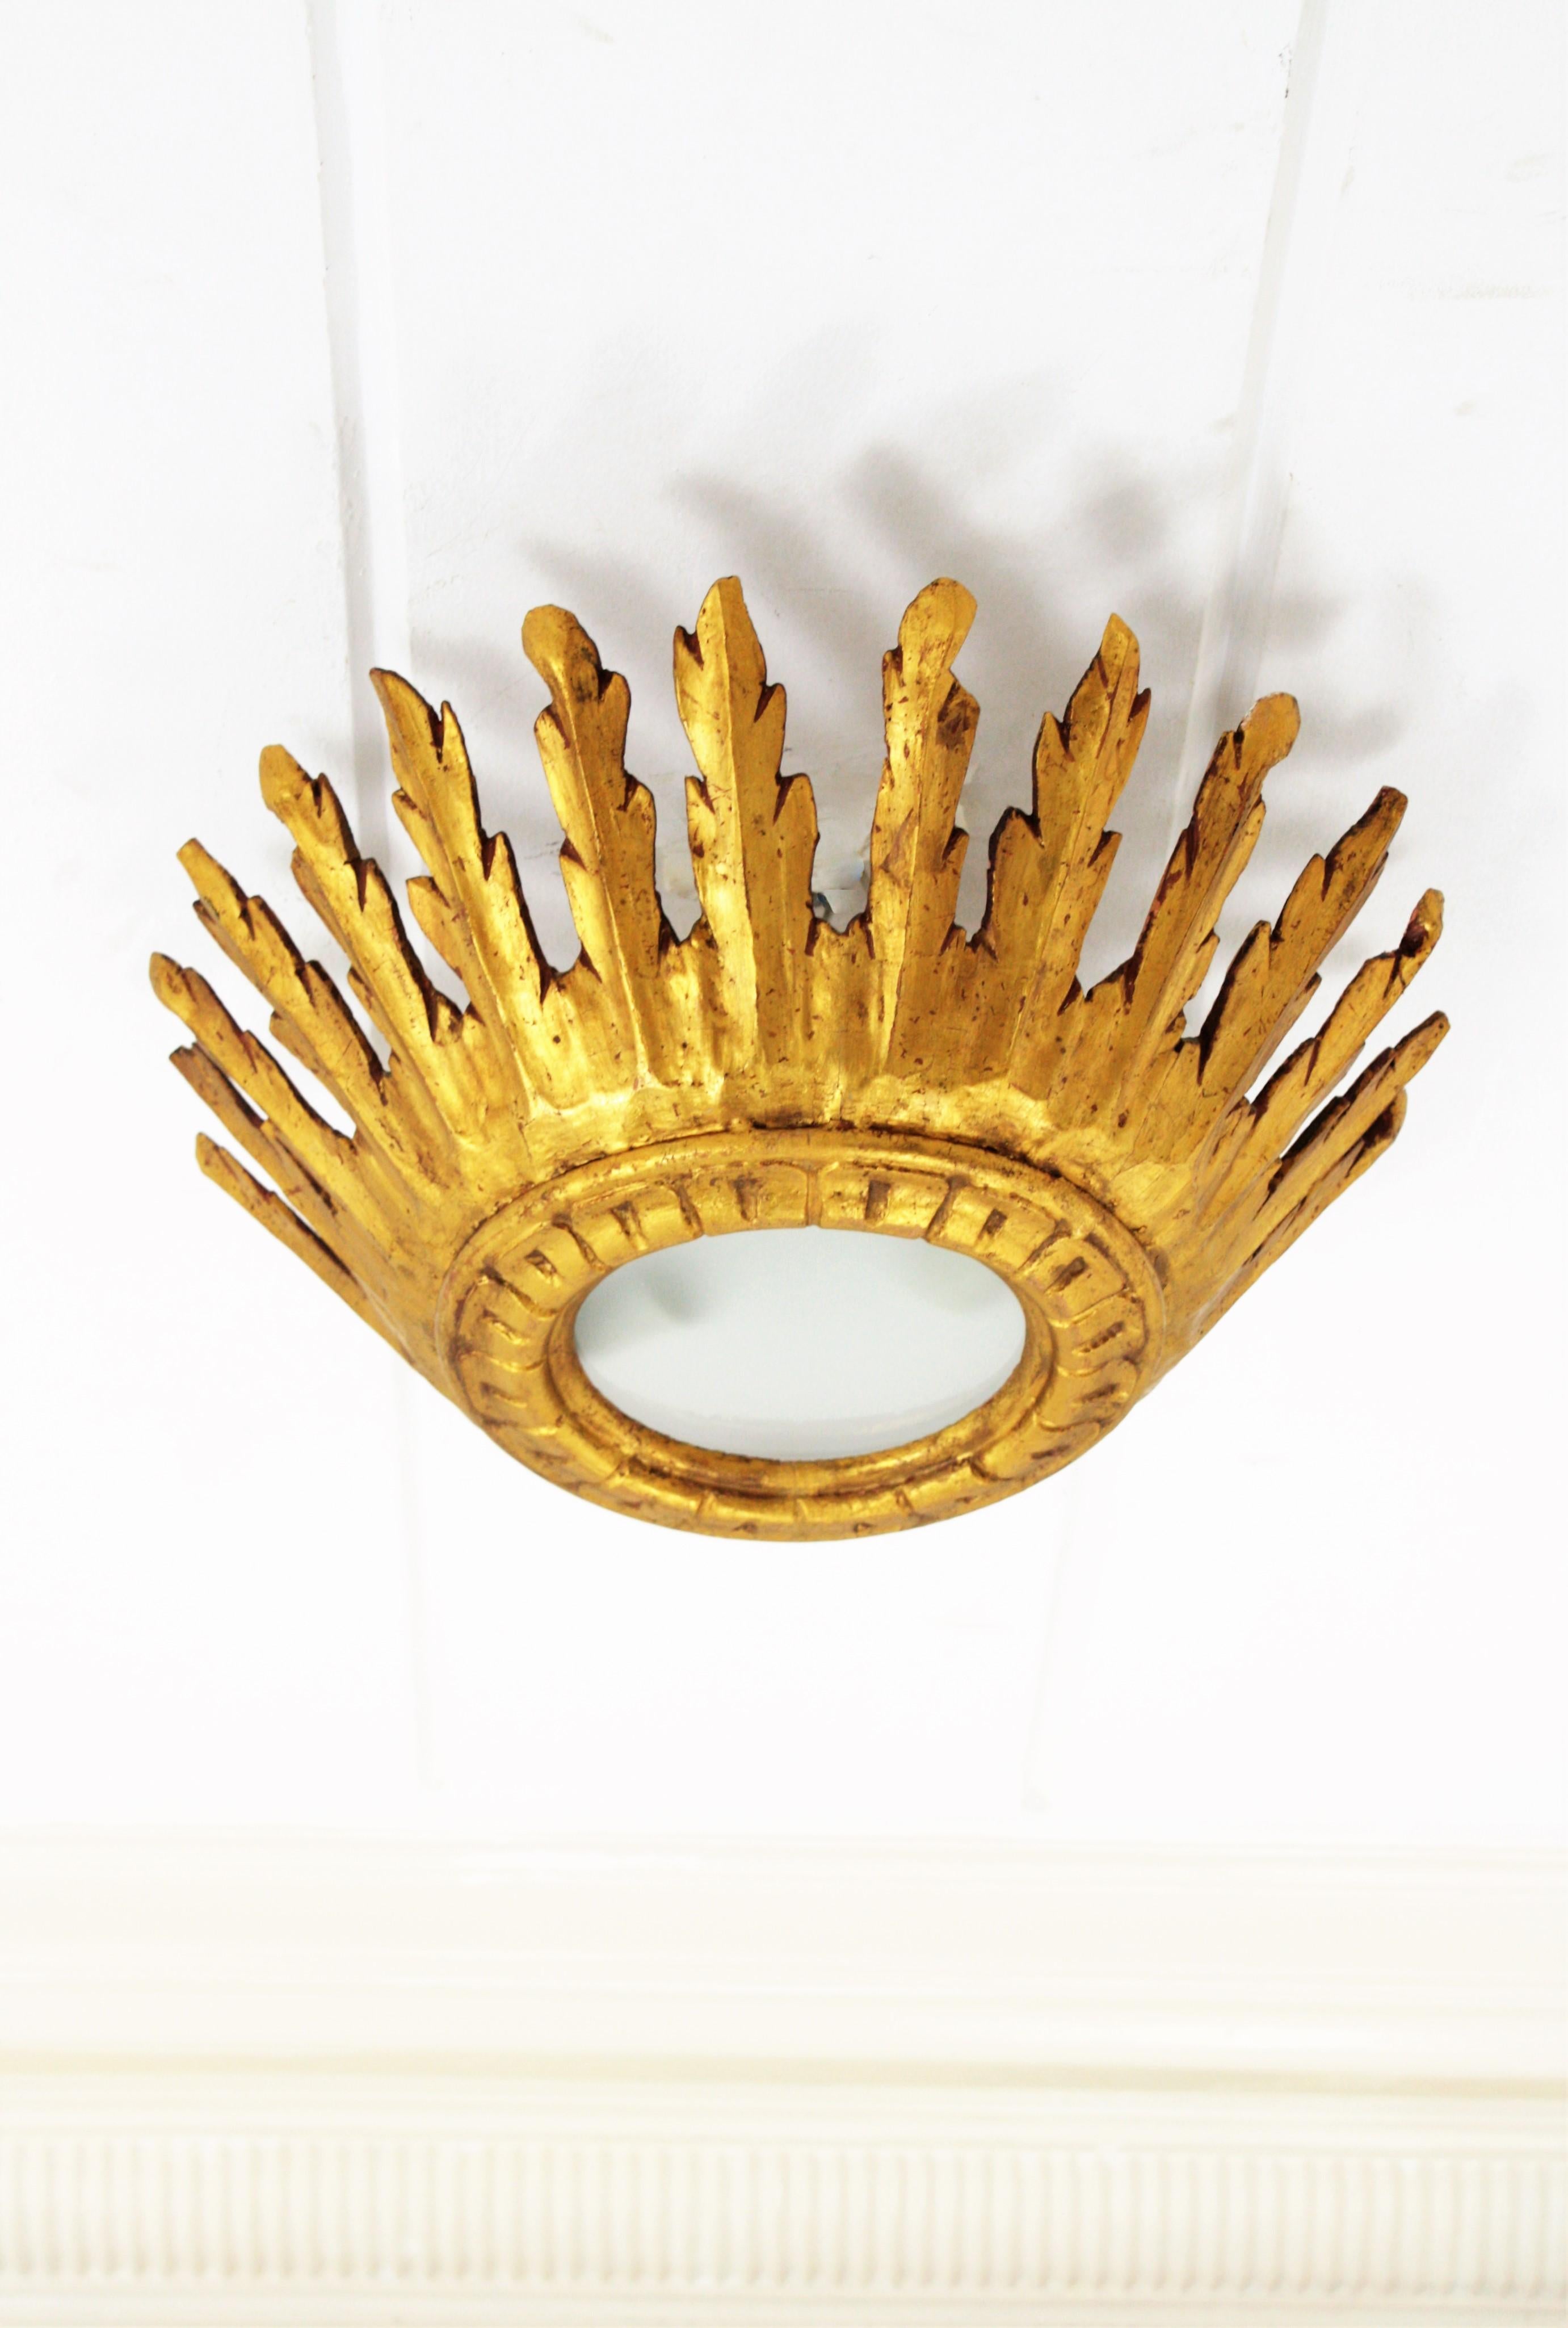 Spanish Baroque Giltwood Crown Sunburst Ceiling Light Fixture with Frosted Glass 4